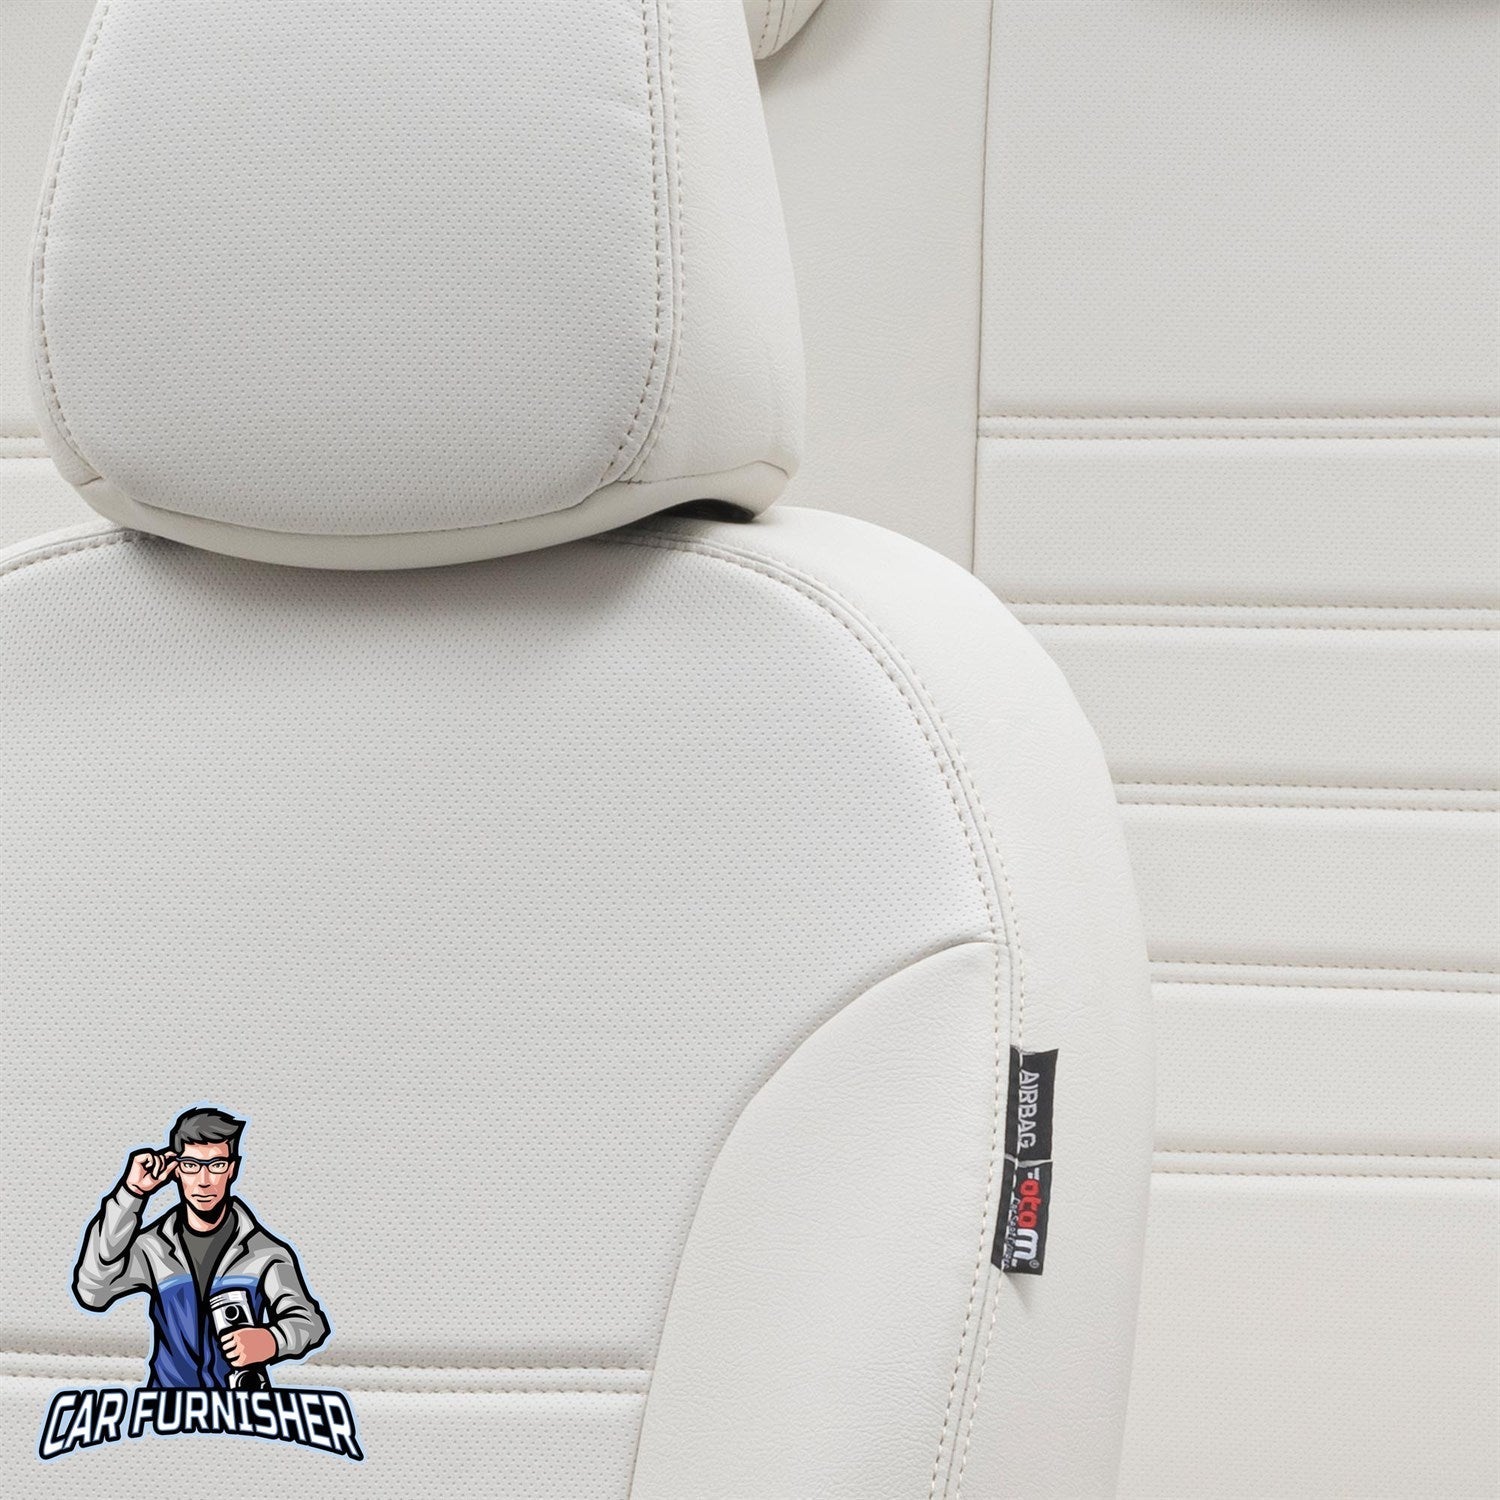 Tesla Model S Seat Cover Istanbul Leather Design Ivory Leather